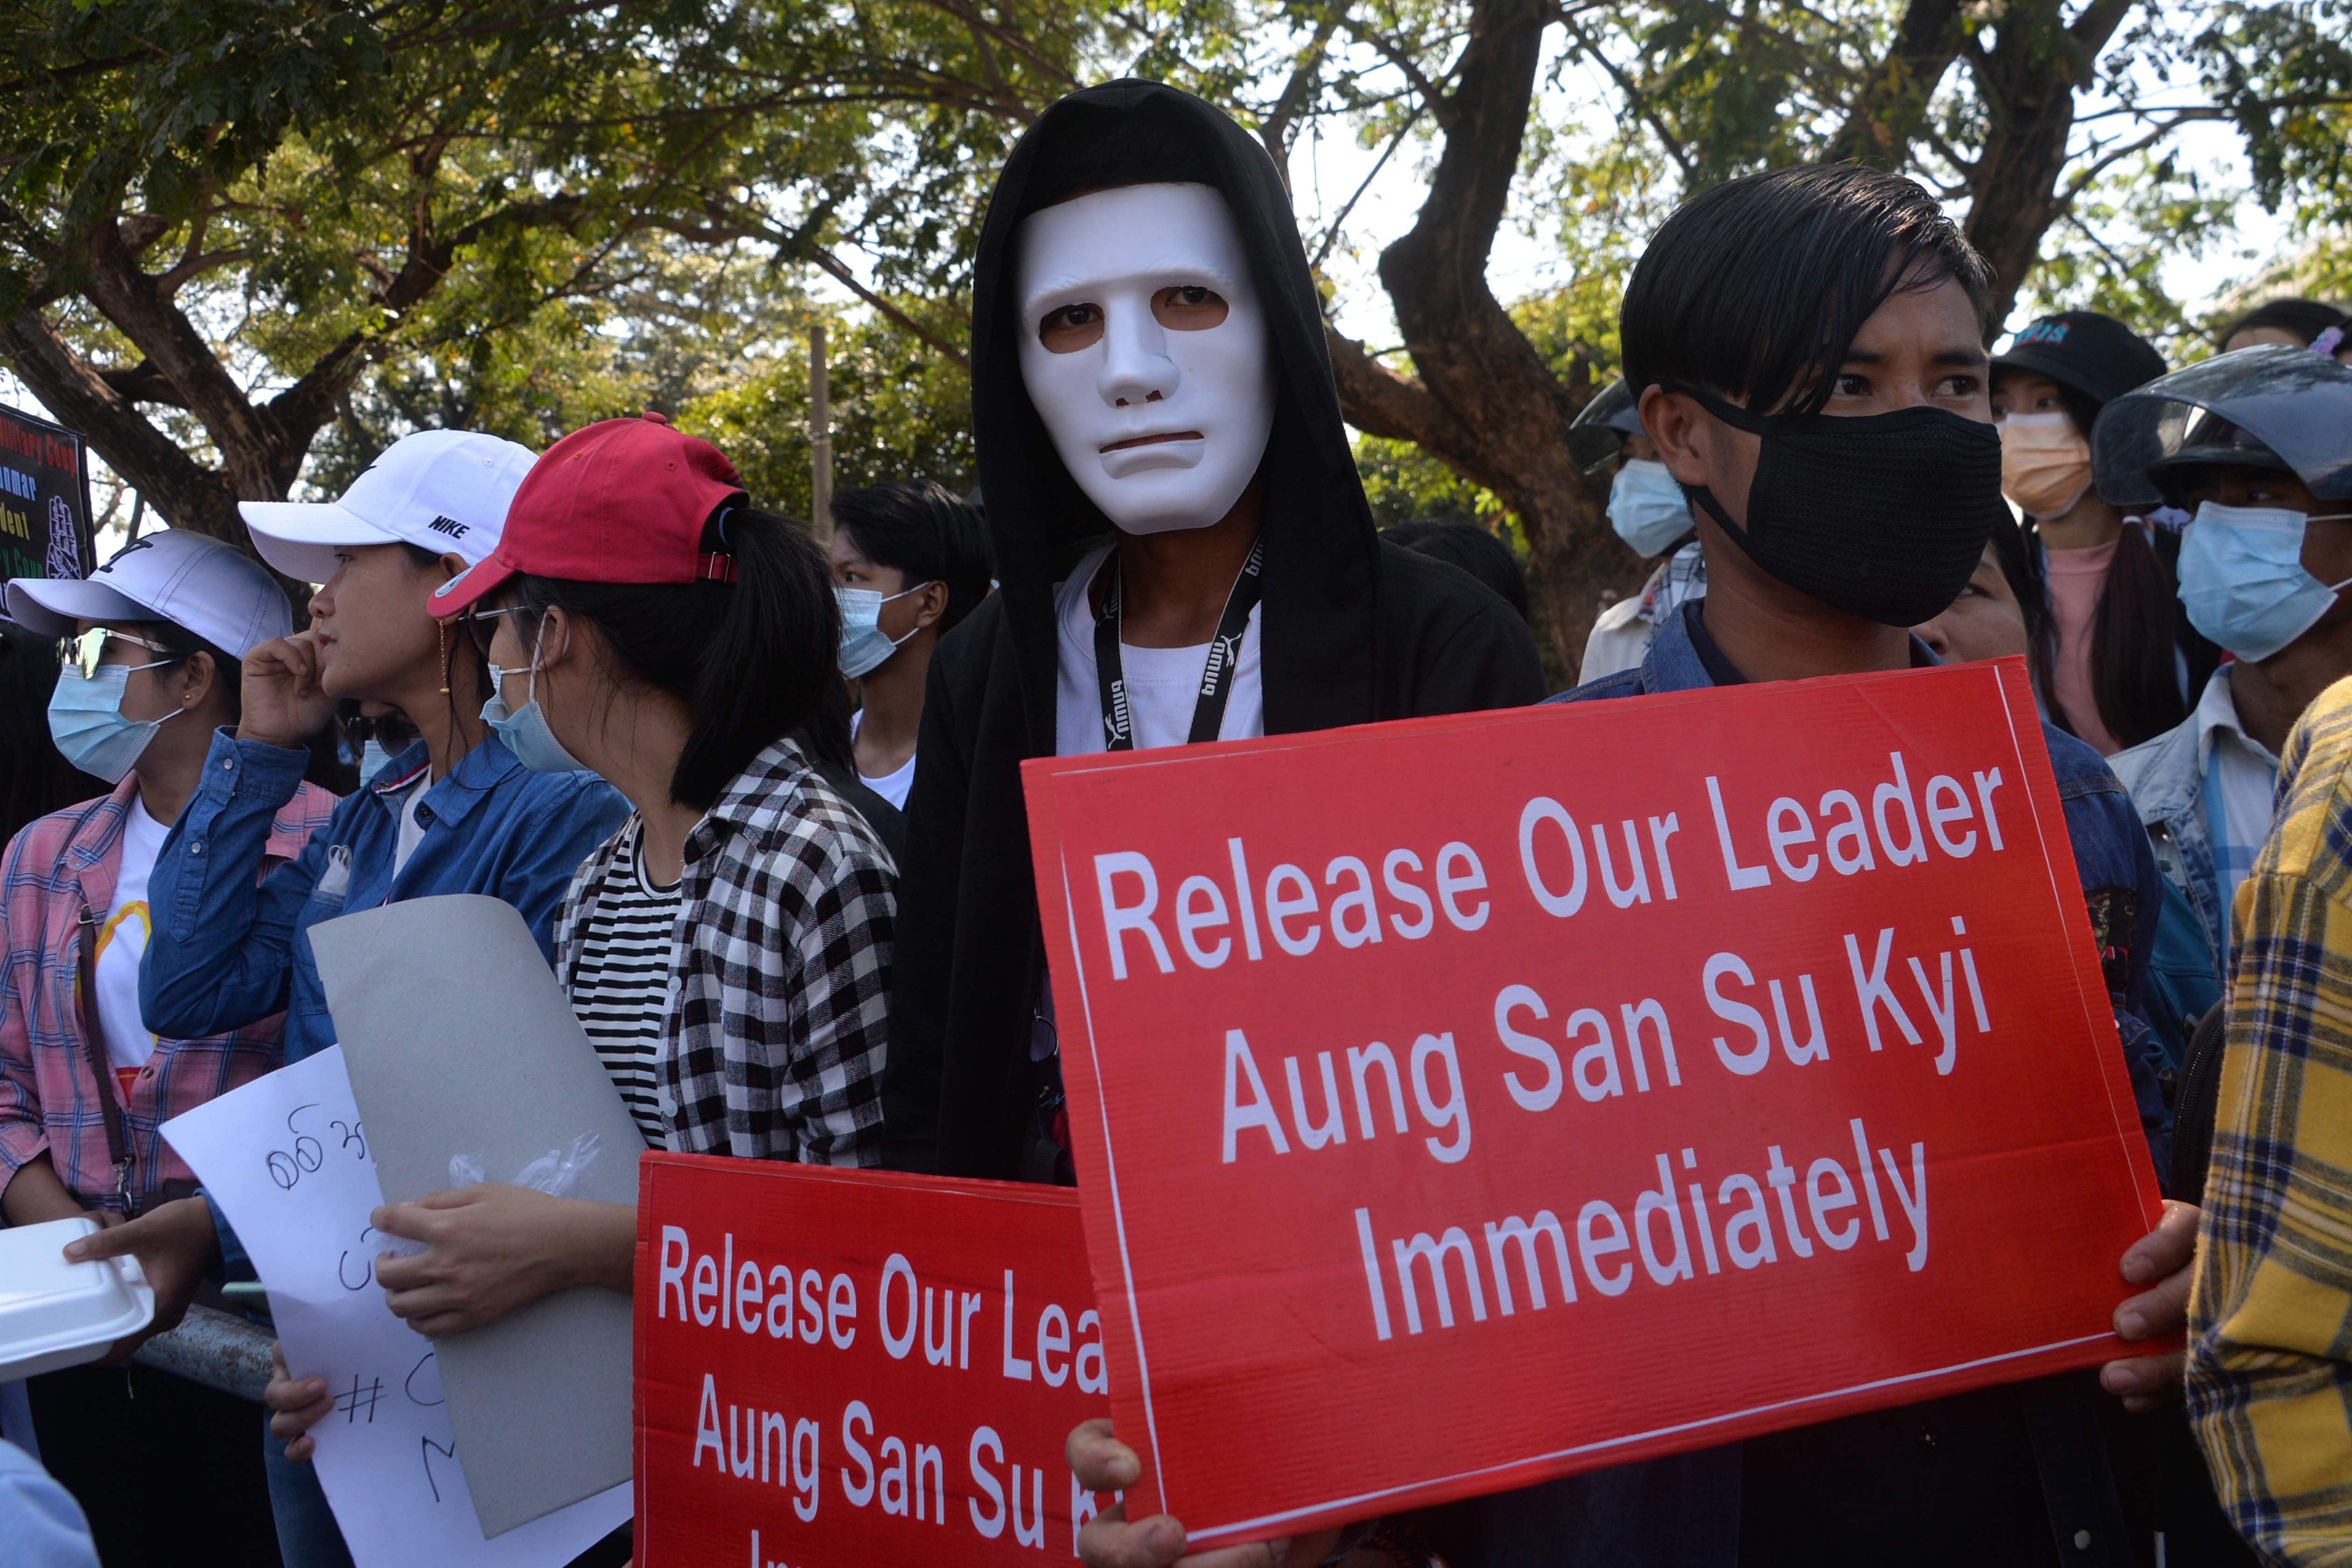 A protester wearing a mask holds up a sign during a demonstration against the military coup in Naypyidaw on February 13, 2021. Credit: AFP Photo